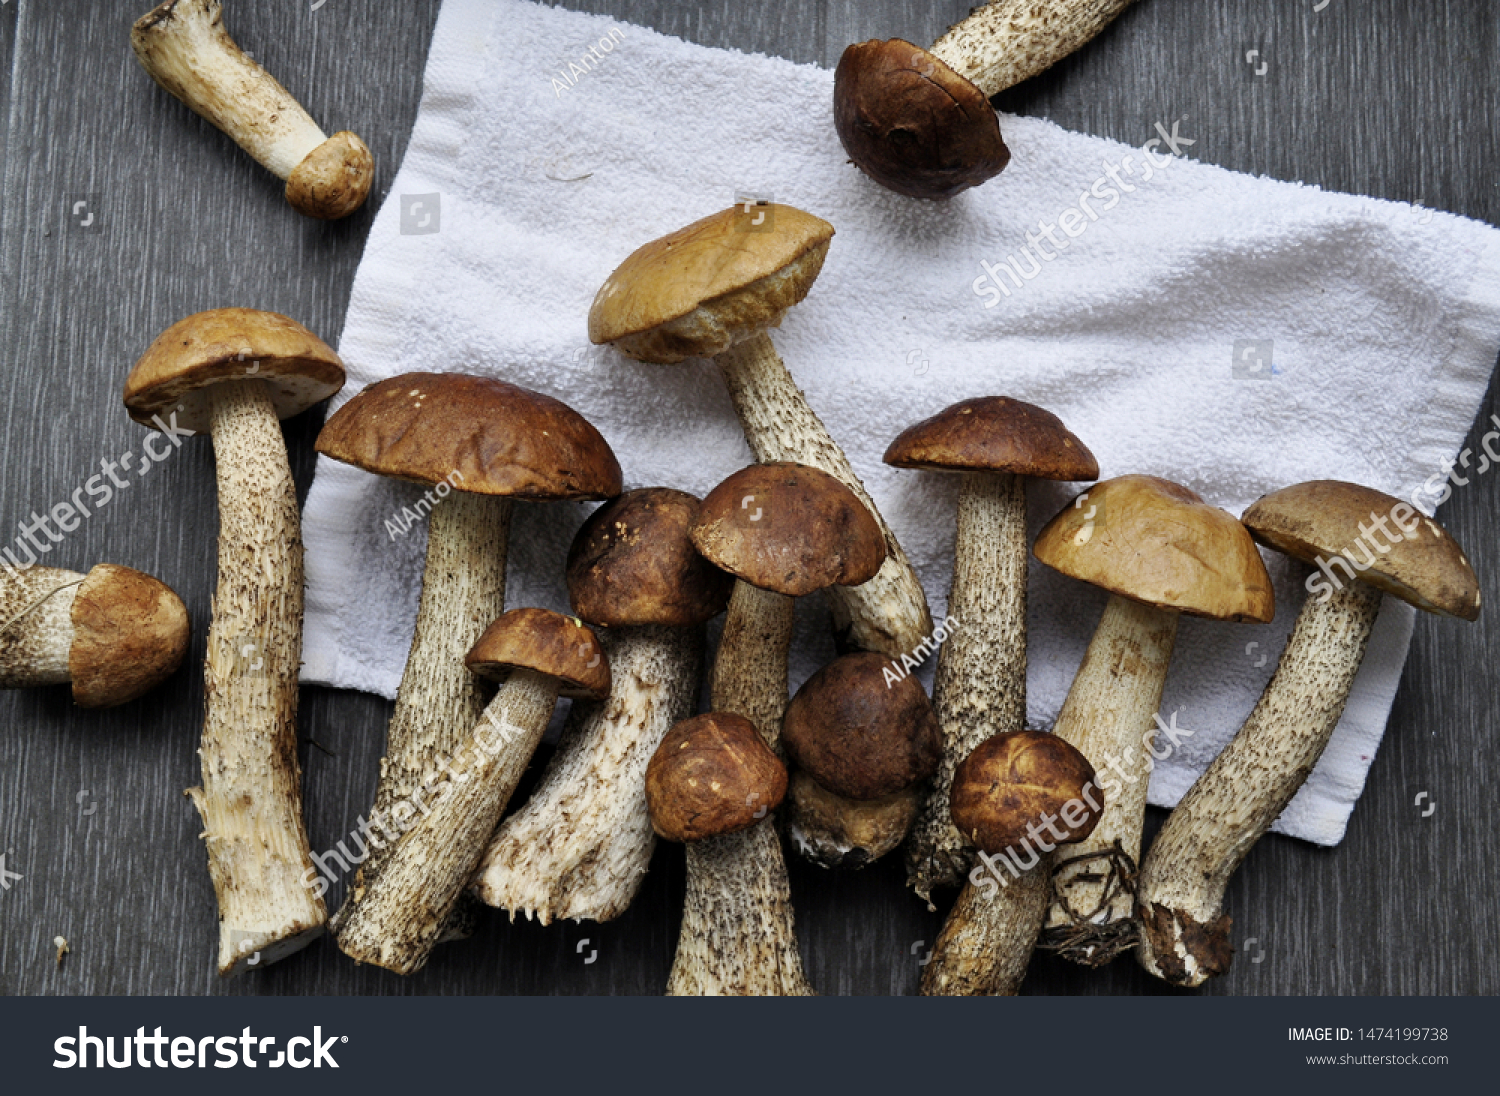 Different variants of compositions with mushrooms
 #1474199738